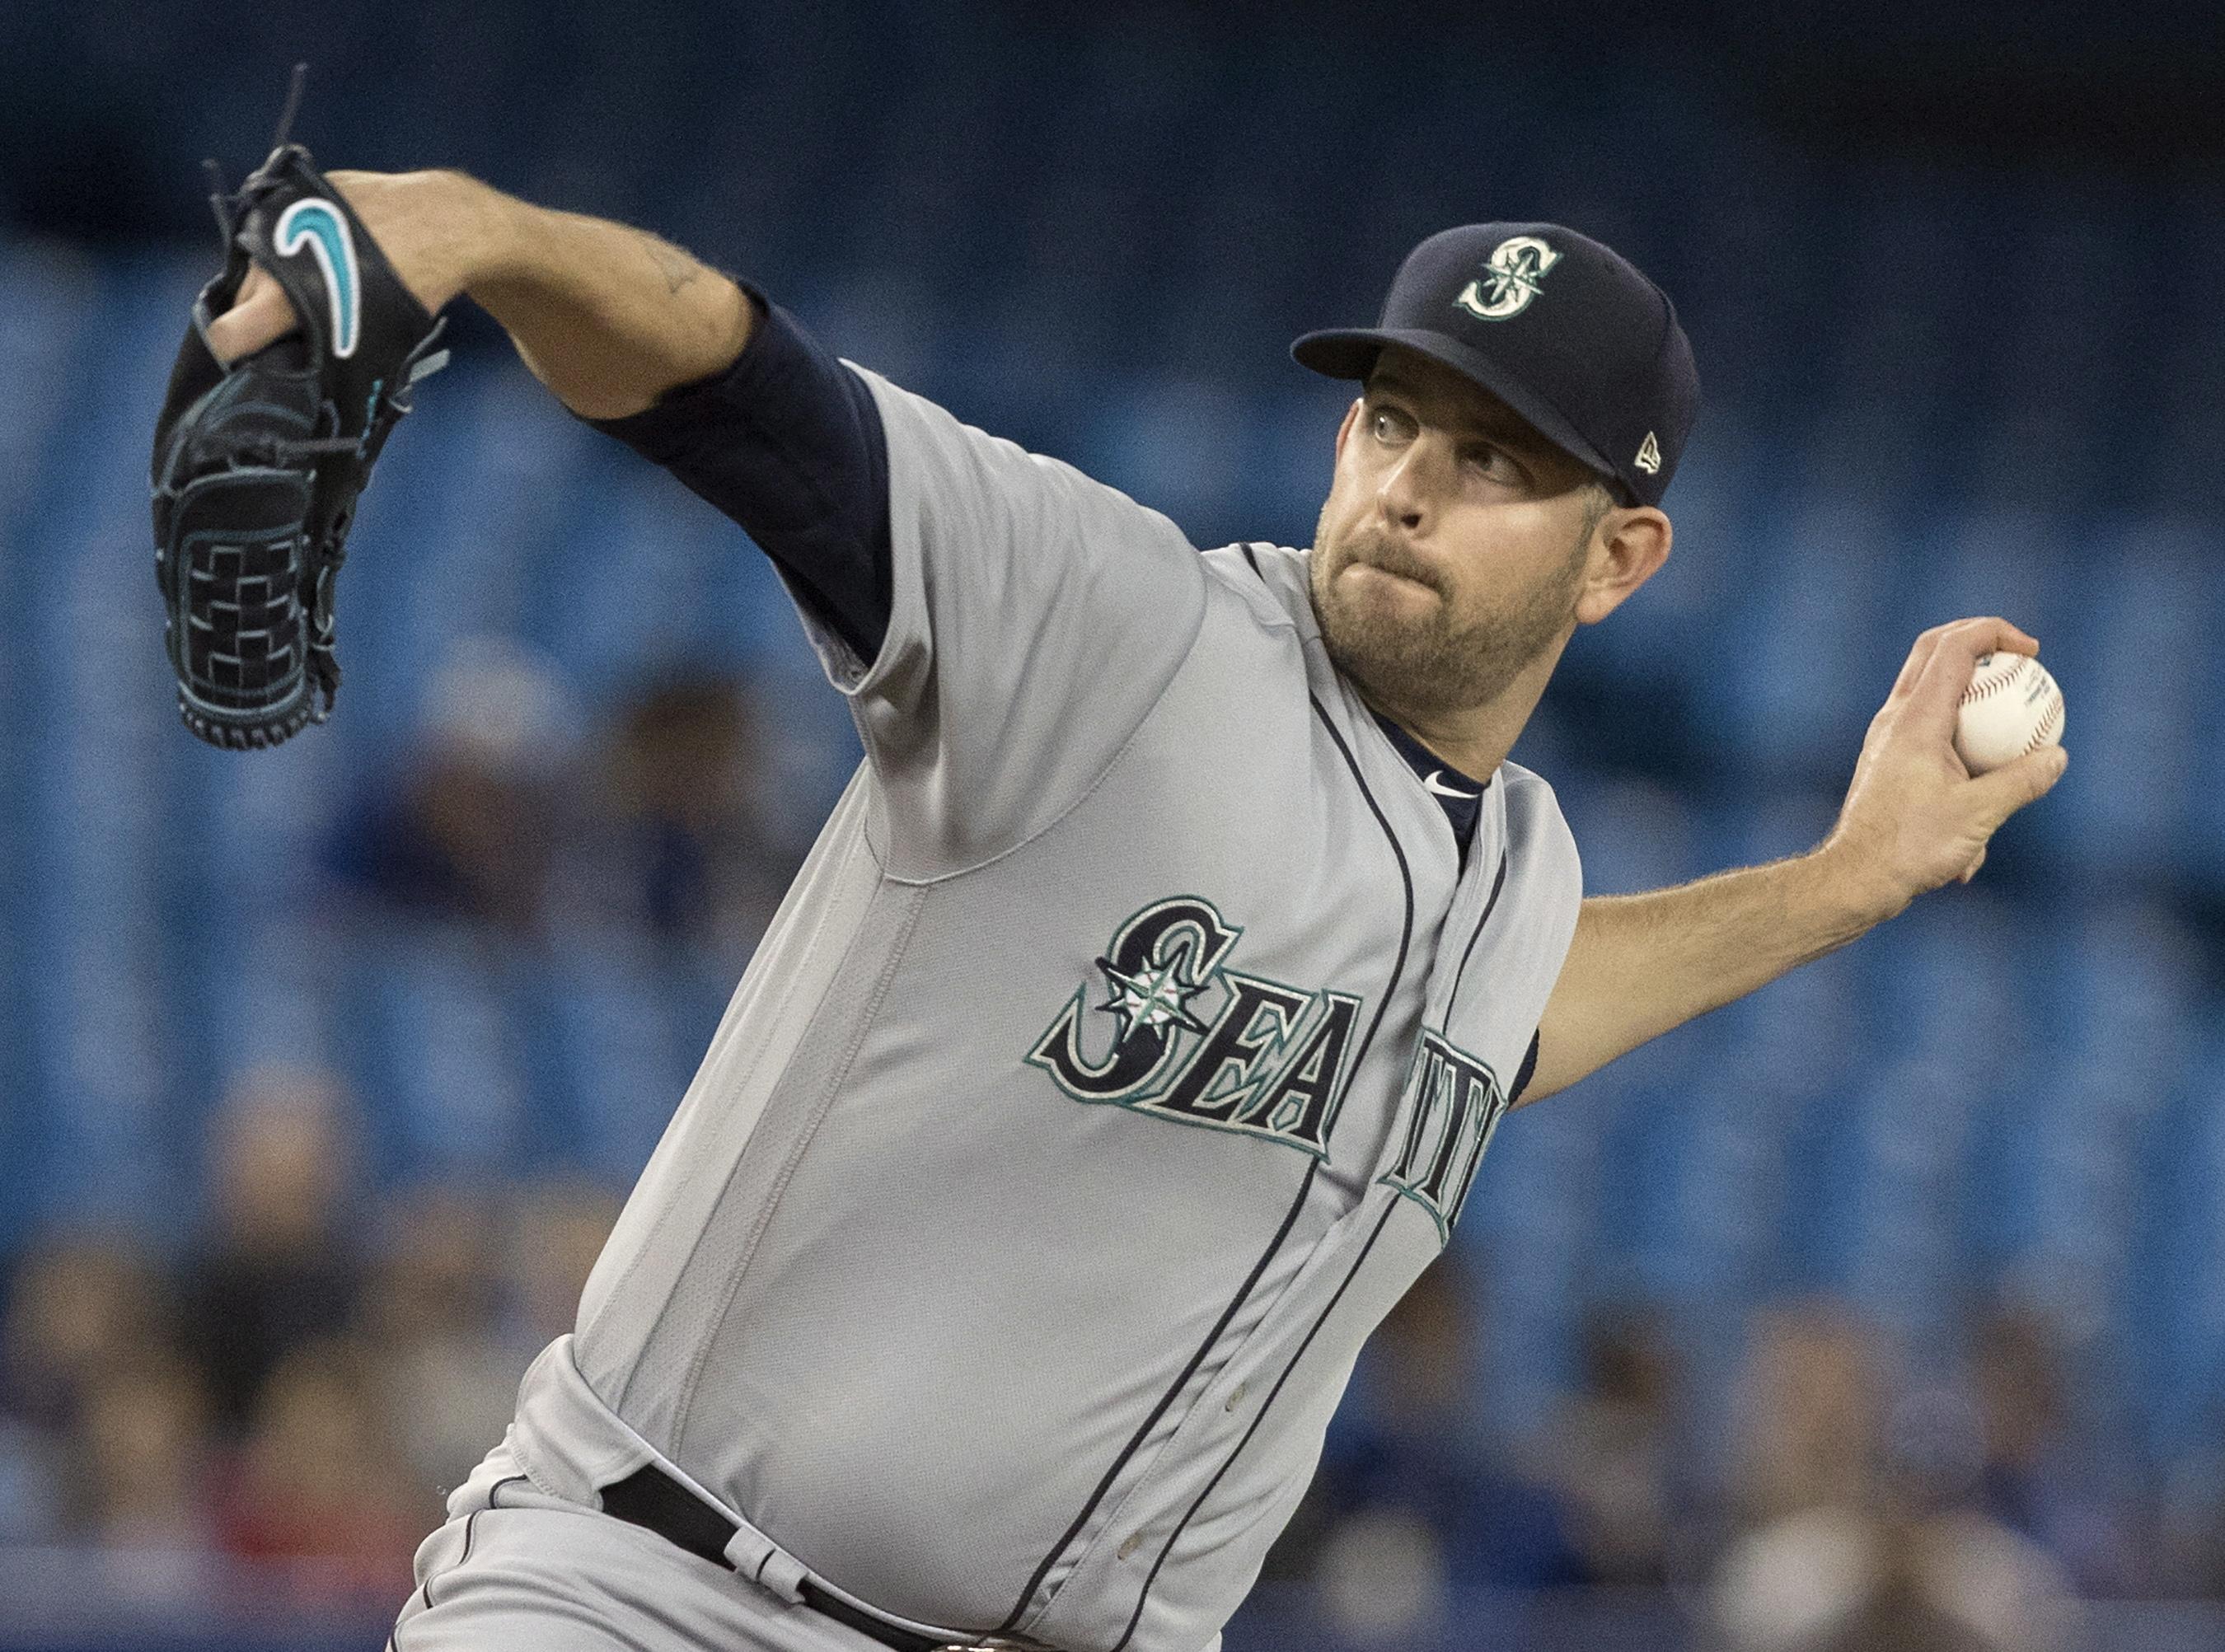 No-Canada! Mariners’ James Paxton pitches no-hitter in Toronto | The ...